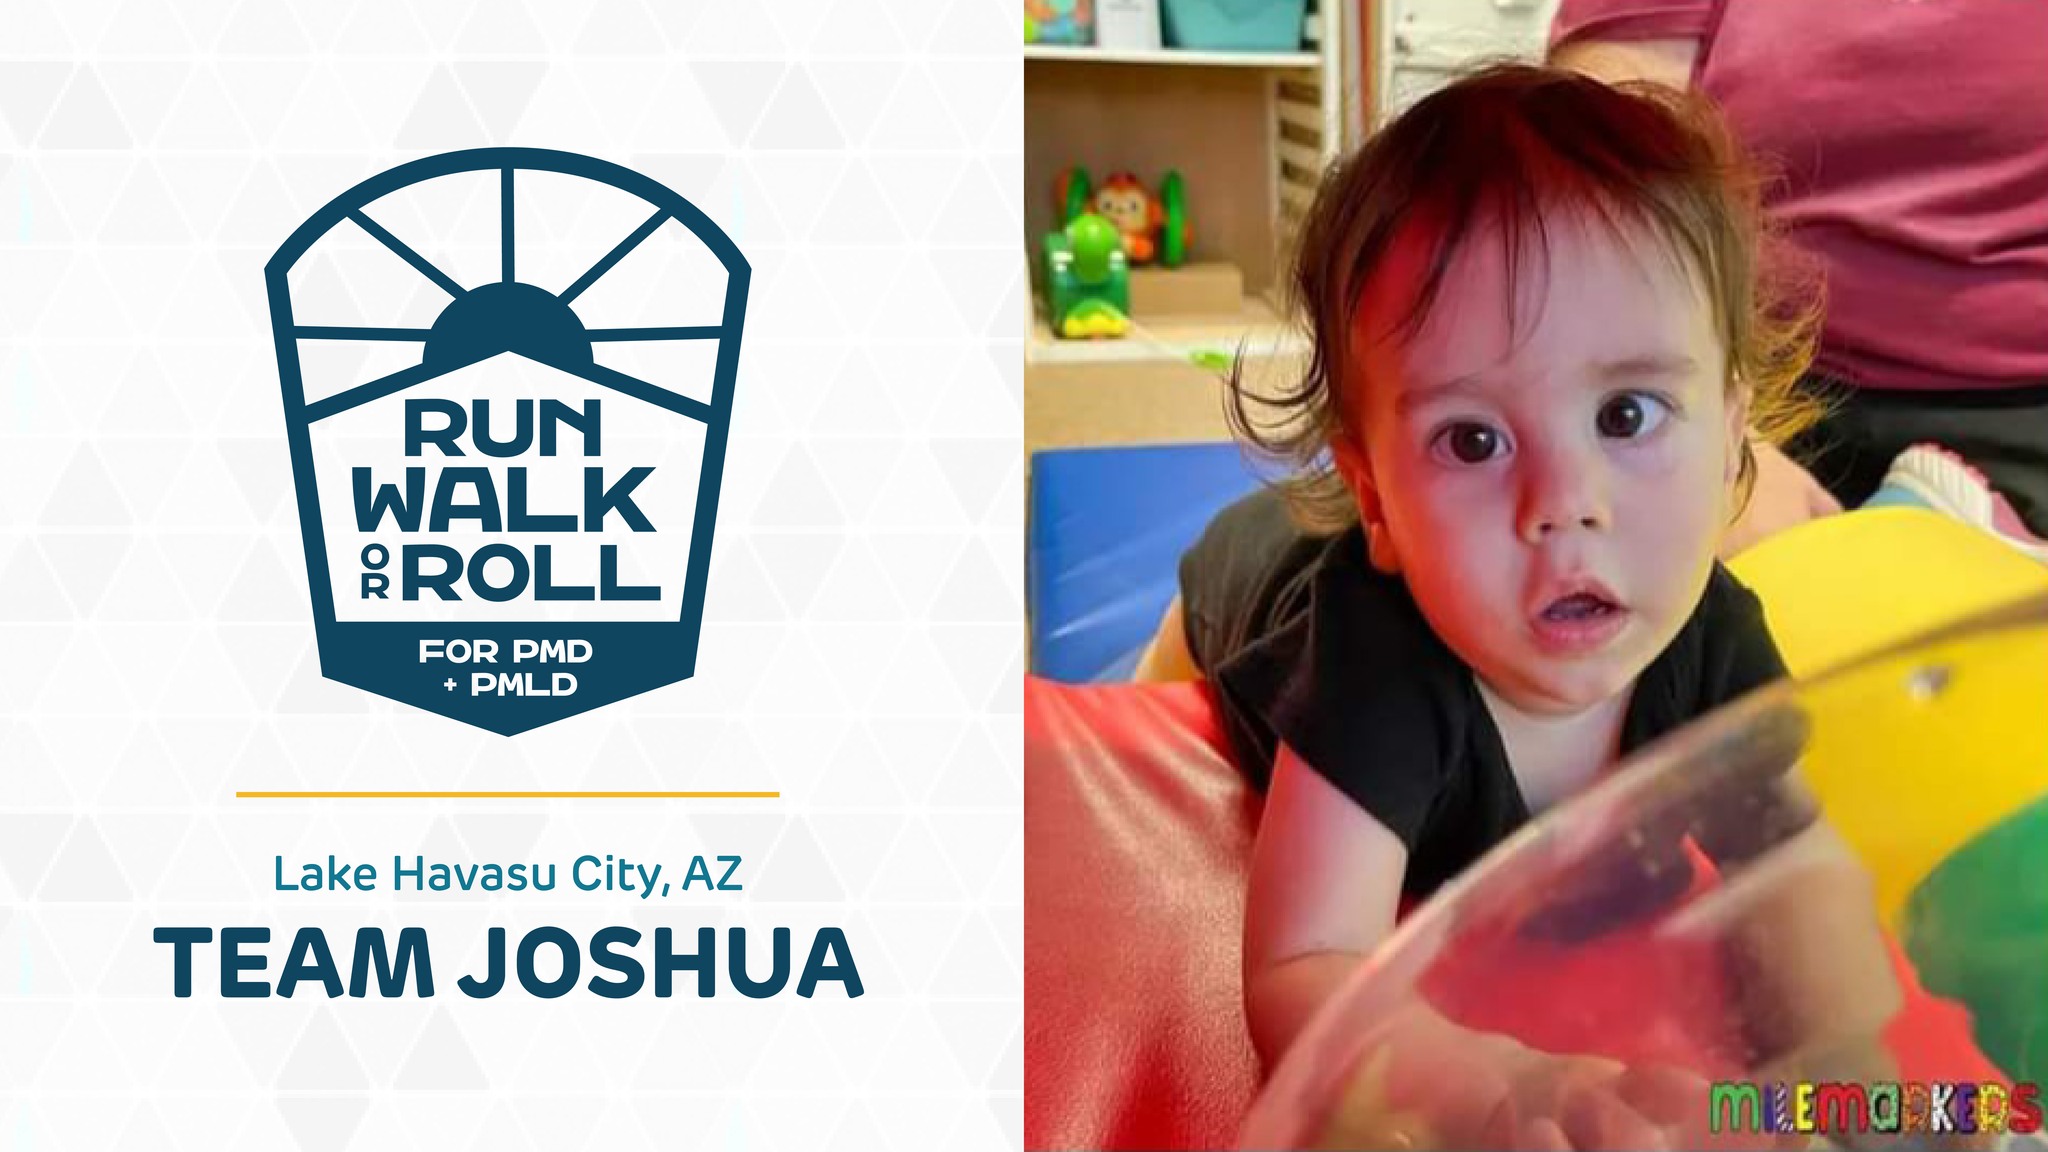 Team Joshua: Walk Run and Roll for PMD and PMLD